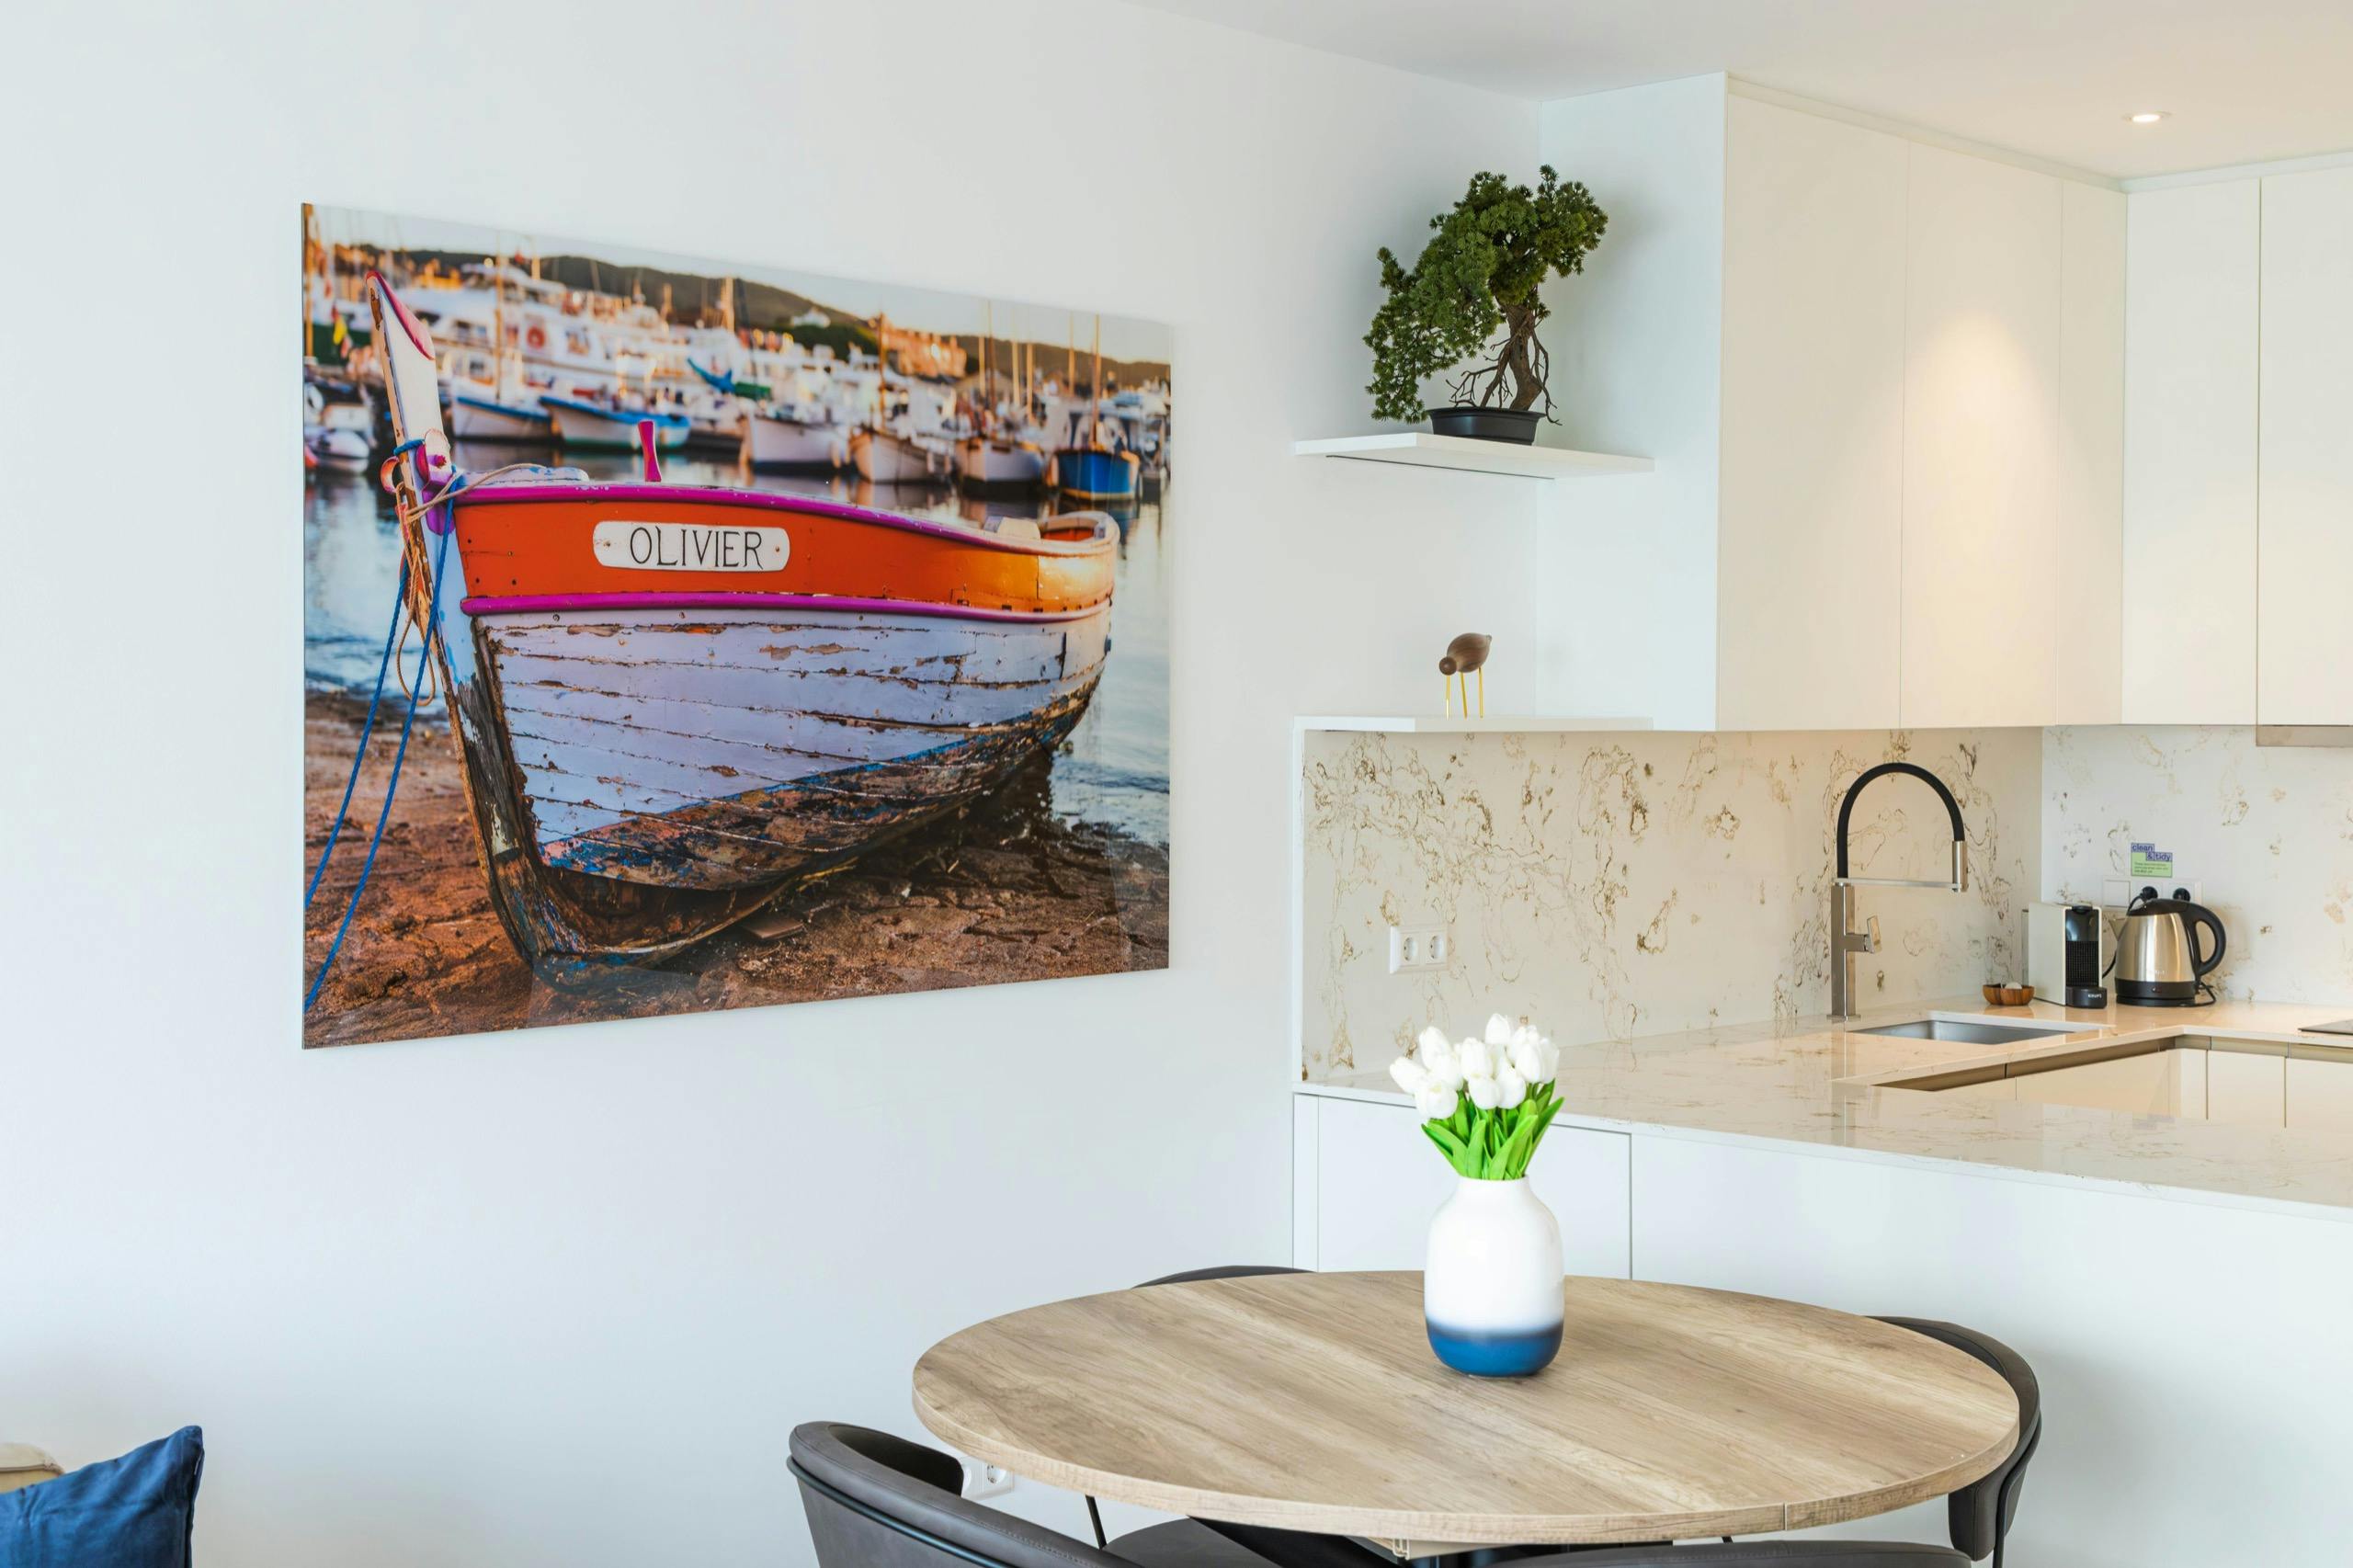 Kitchen and dining area zone comprised of a round dining table with chairs and a flower vase on top. On the wall hangs a big picture with a boat ashore.